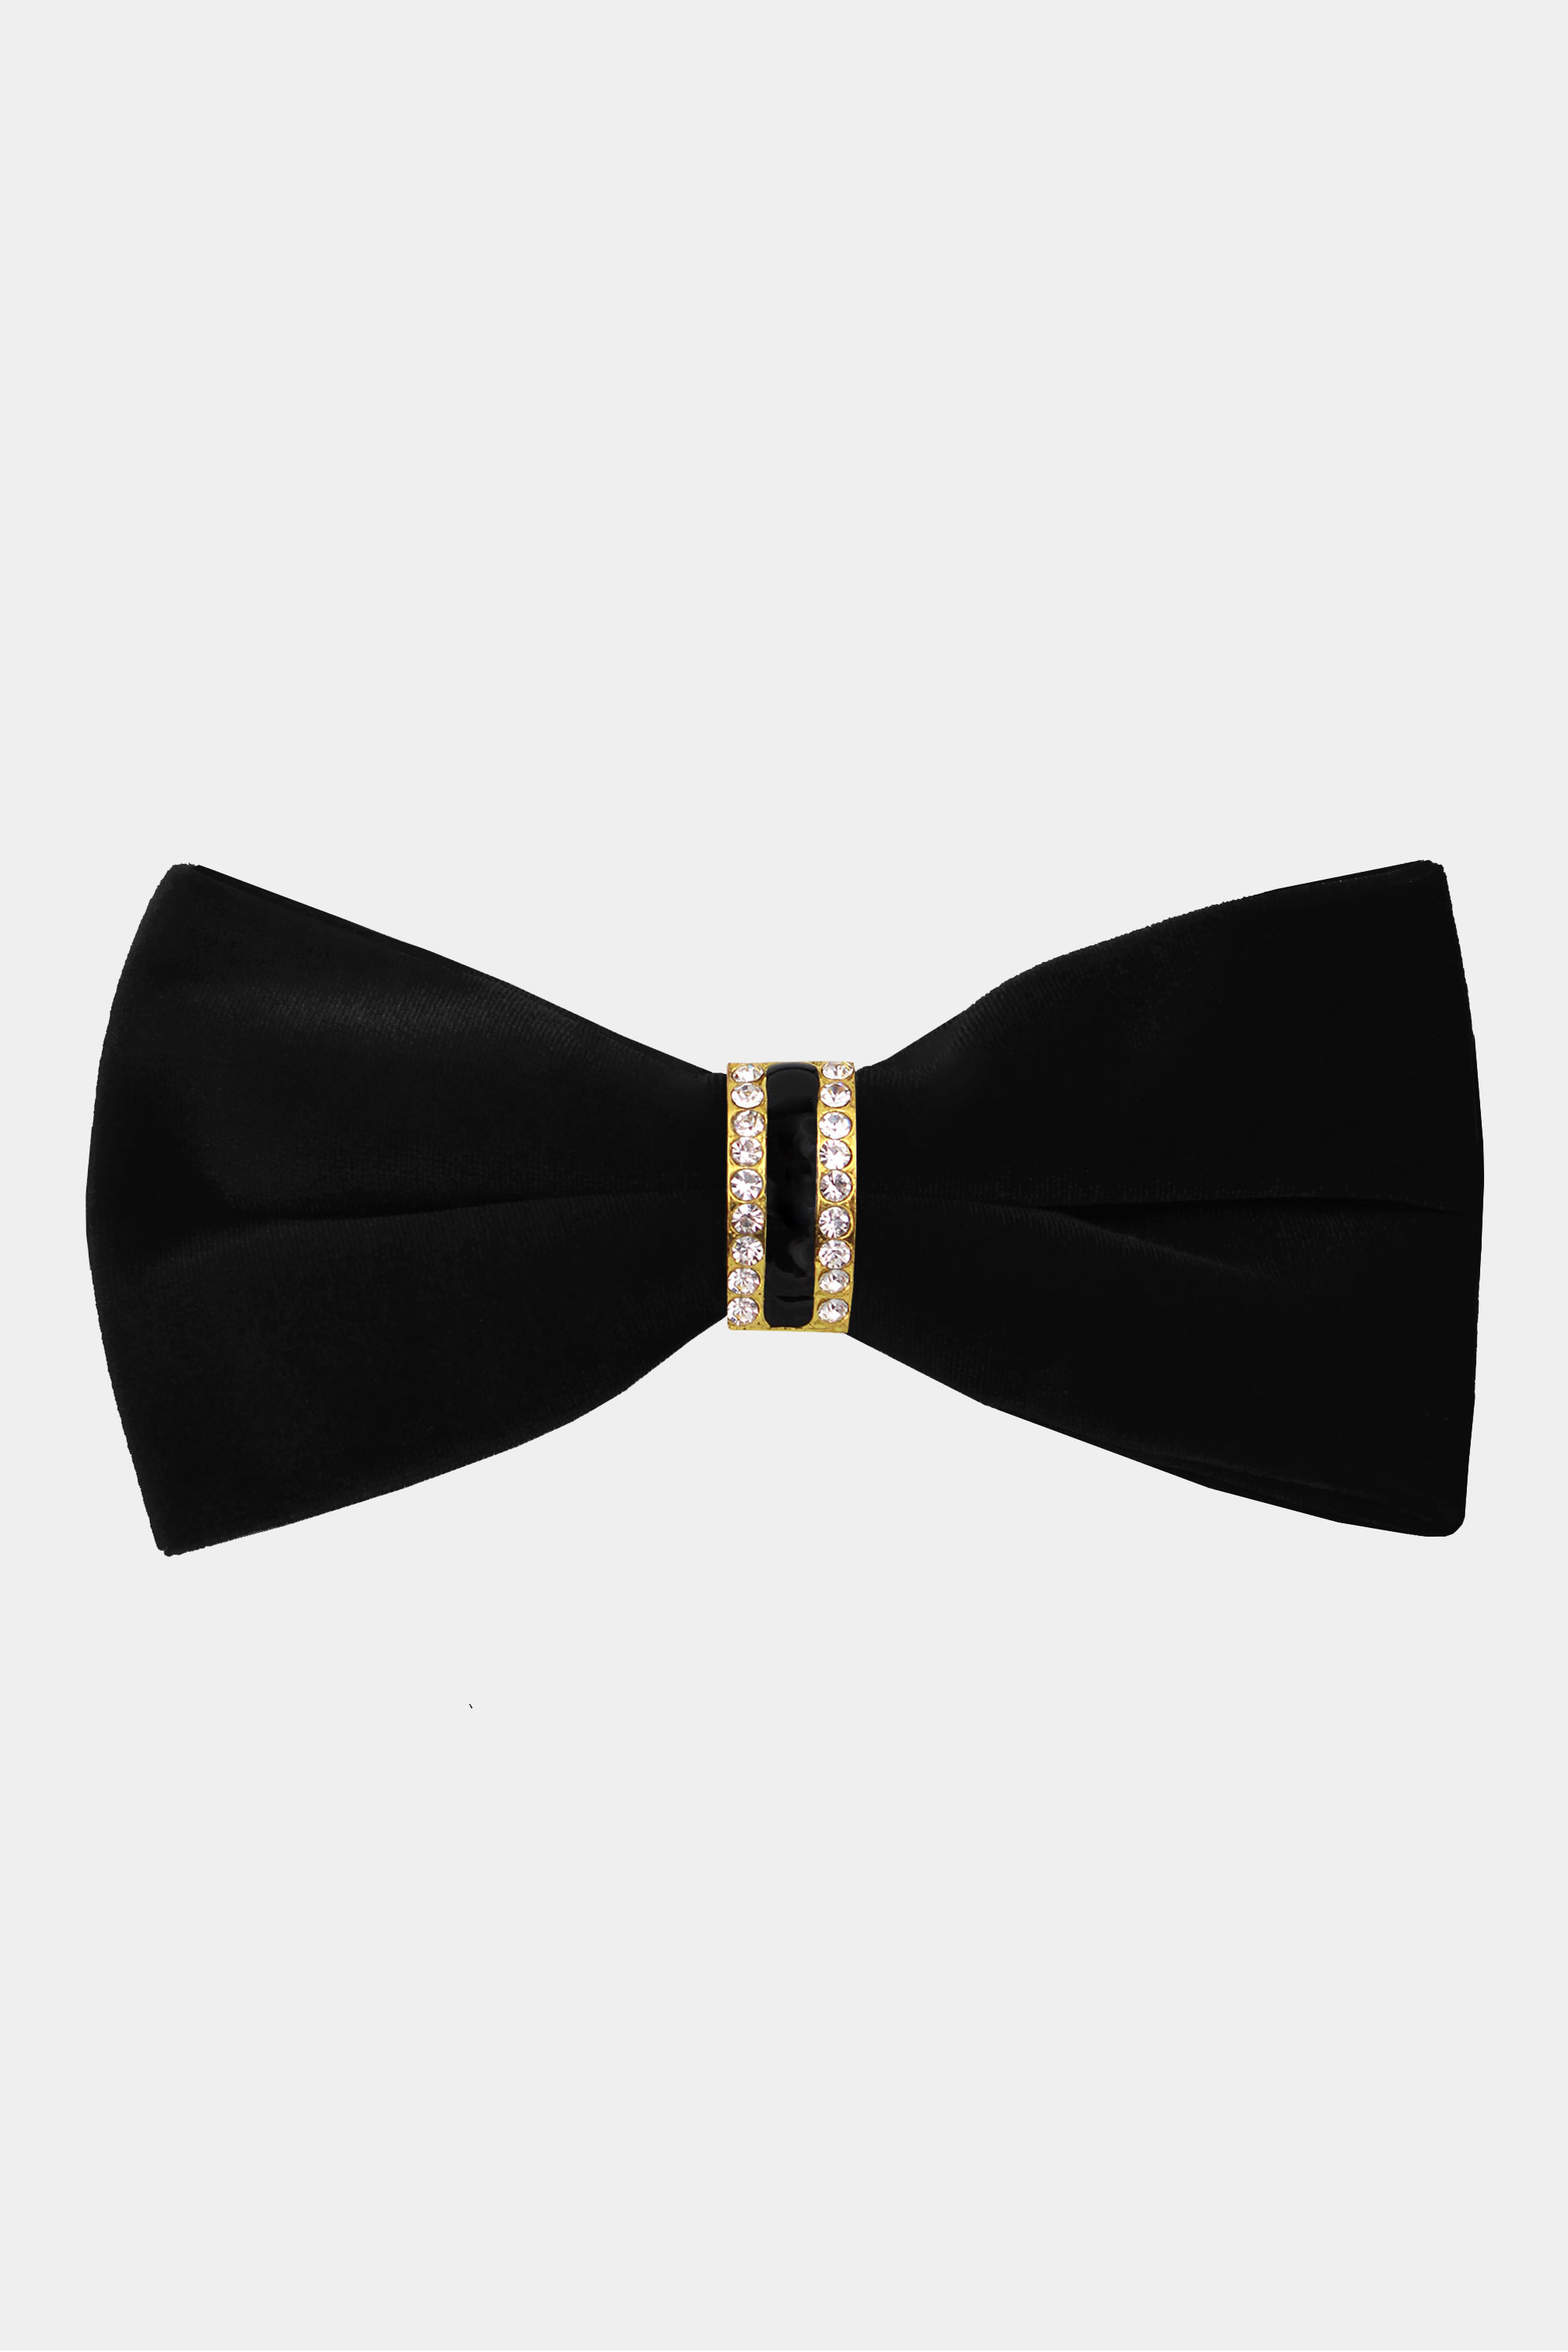 Black and Gold Mens Bow Tie for Men Wedding Bow Tie Set 